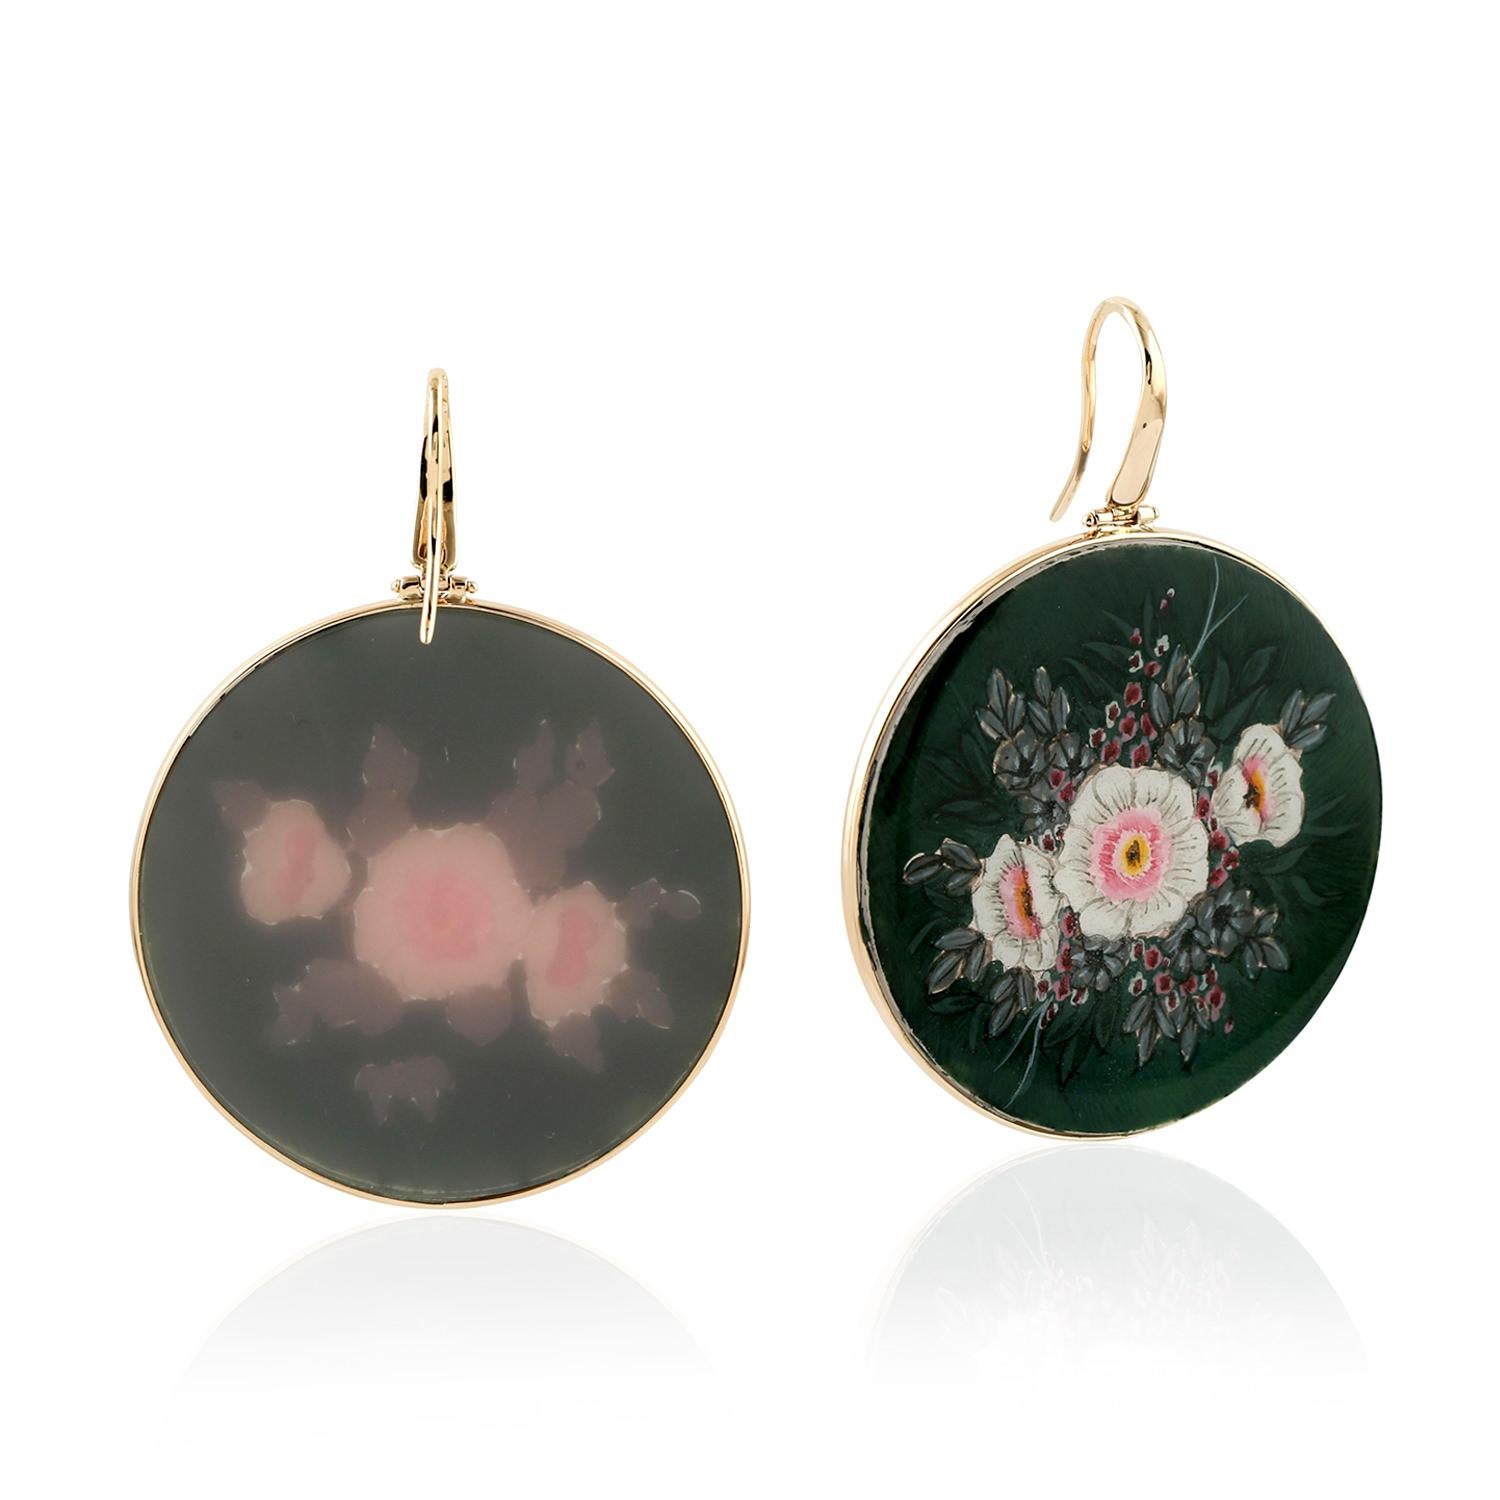 Sweet this round Hand Painted Flower Bakelite Earring in 18k Yellow Gold is perfect for Mother's Day gift or any occasion.


18KT Gold: 5.939gms
Bakelite: 40.30cts
Enamel: 3.50gms
